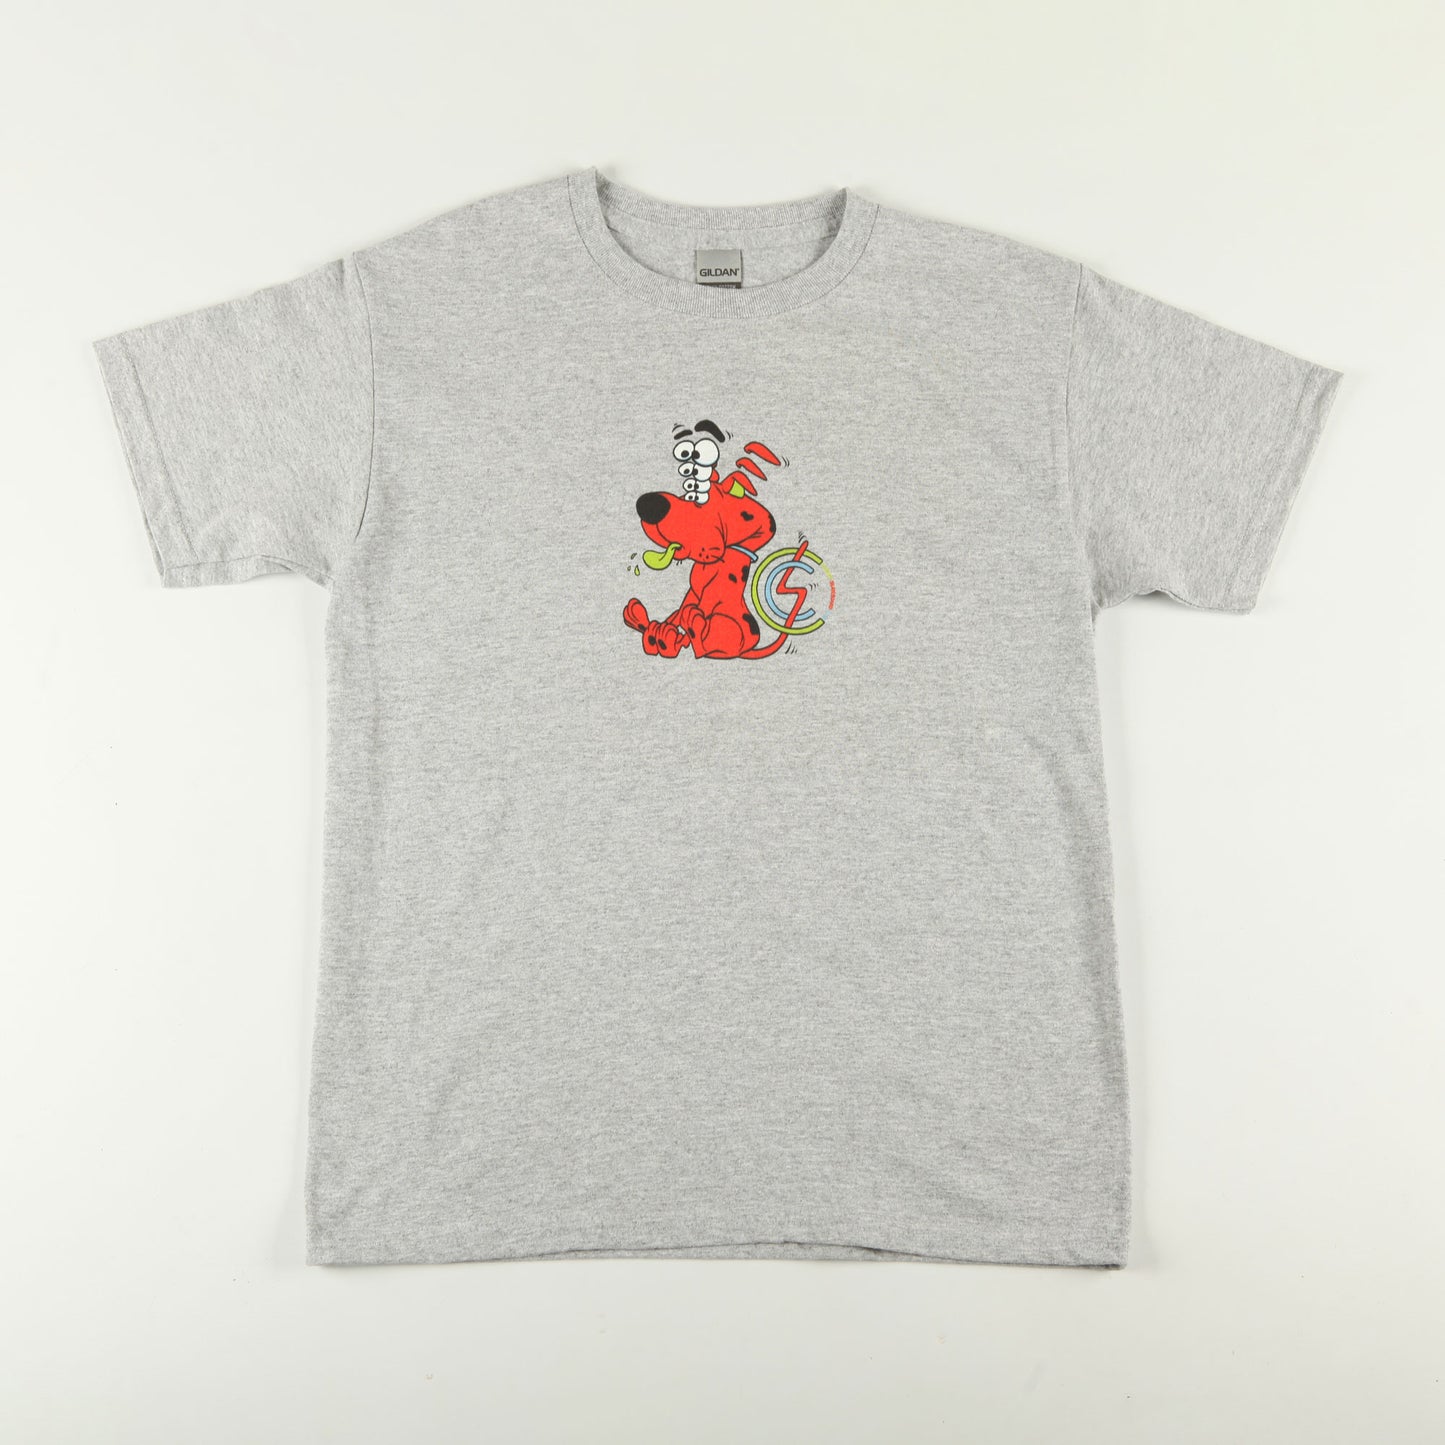 CSC 'Waggy' Kids T-Shirt (Heather Grey)